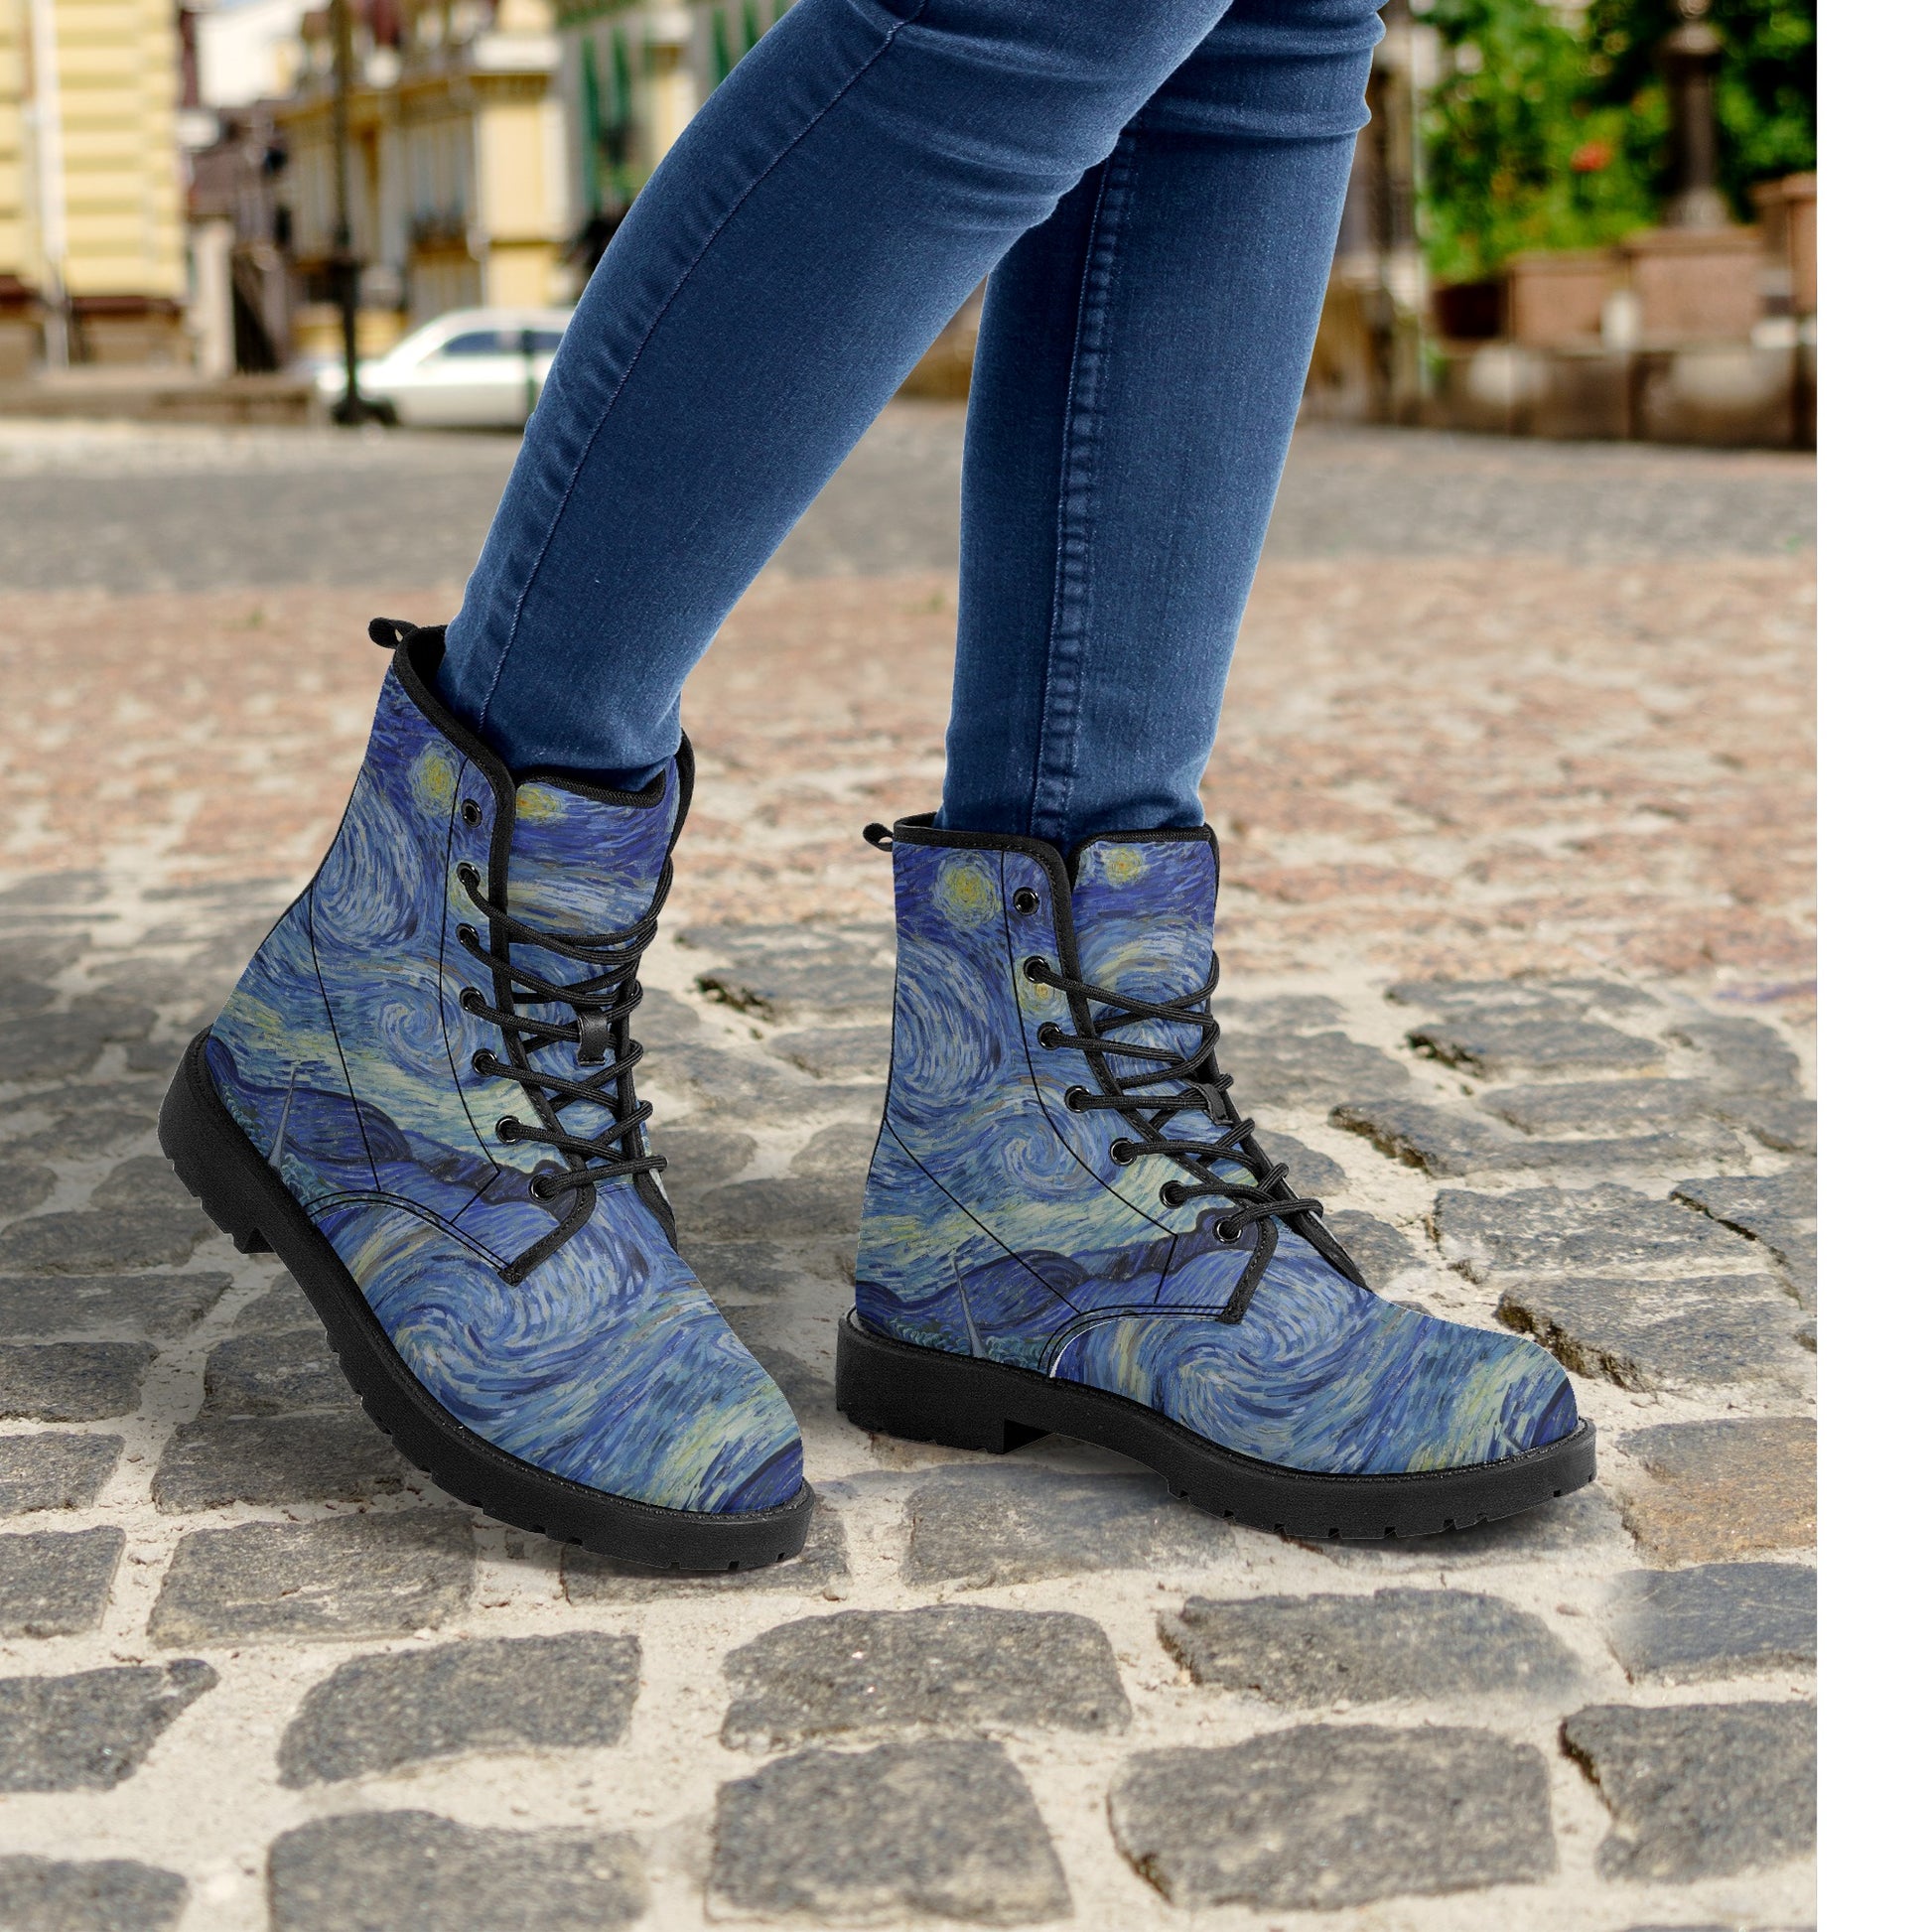 Starry Night Women Leather Boots, Blue Van Gogh Vegan Lace Up Shoes Hiking Festival Black Ankle Combat Work Winter Waterproof Custom Gift Starcove Fashion